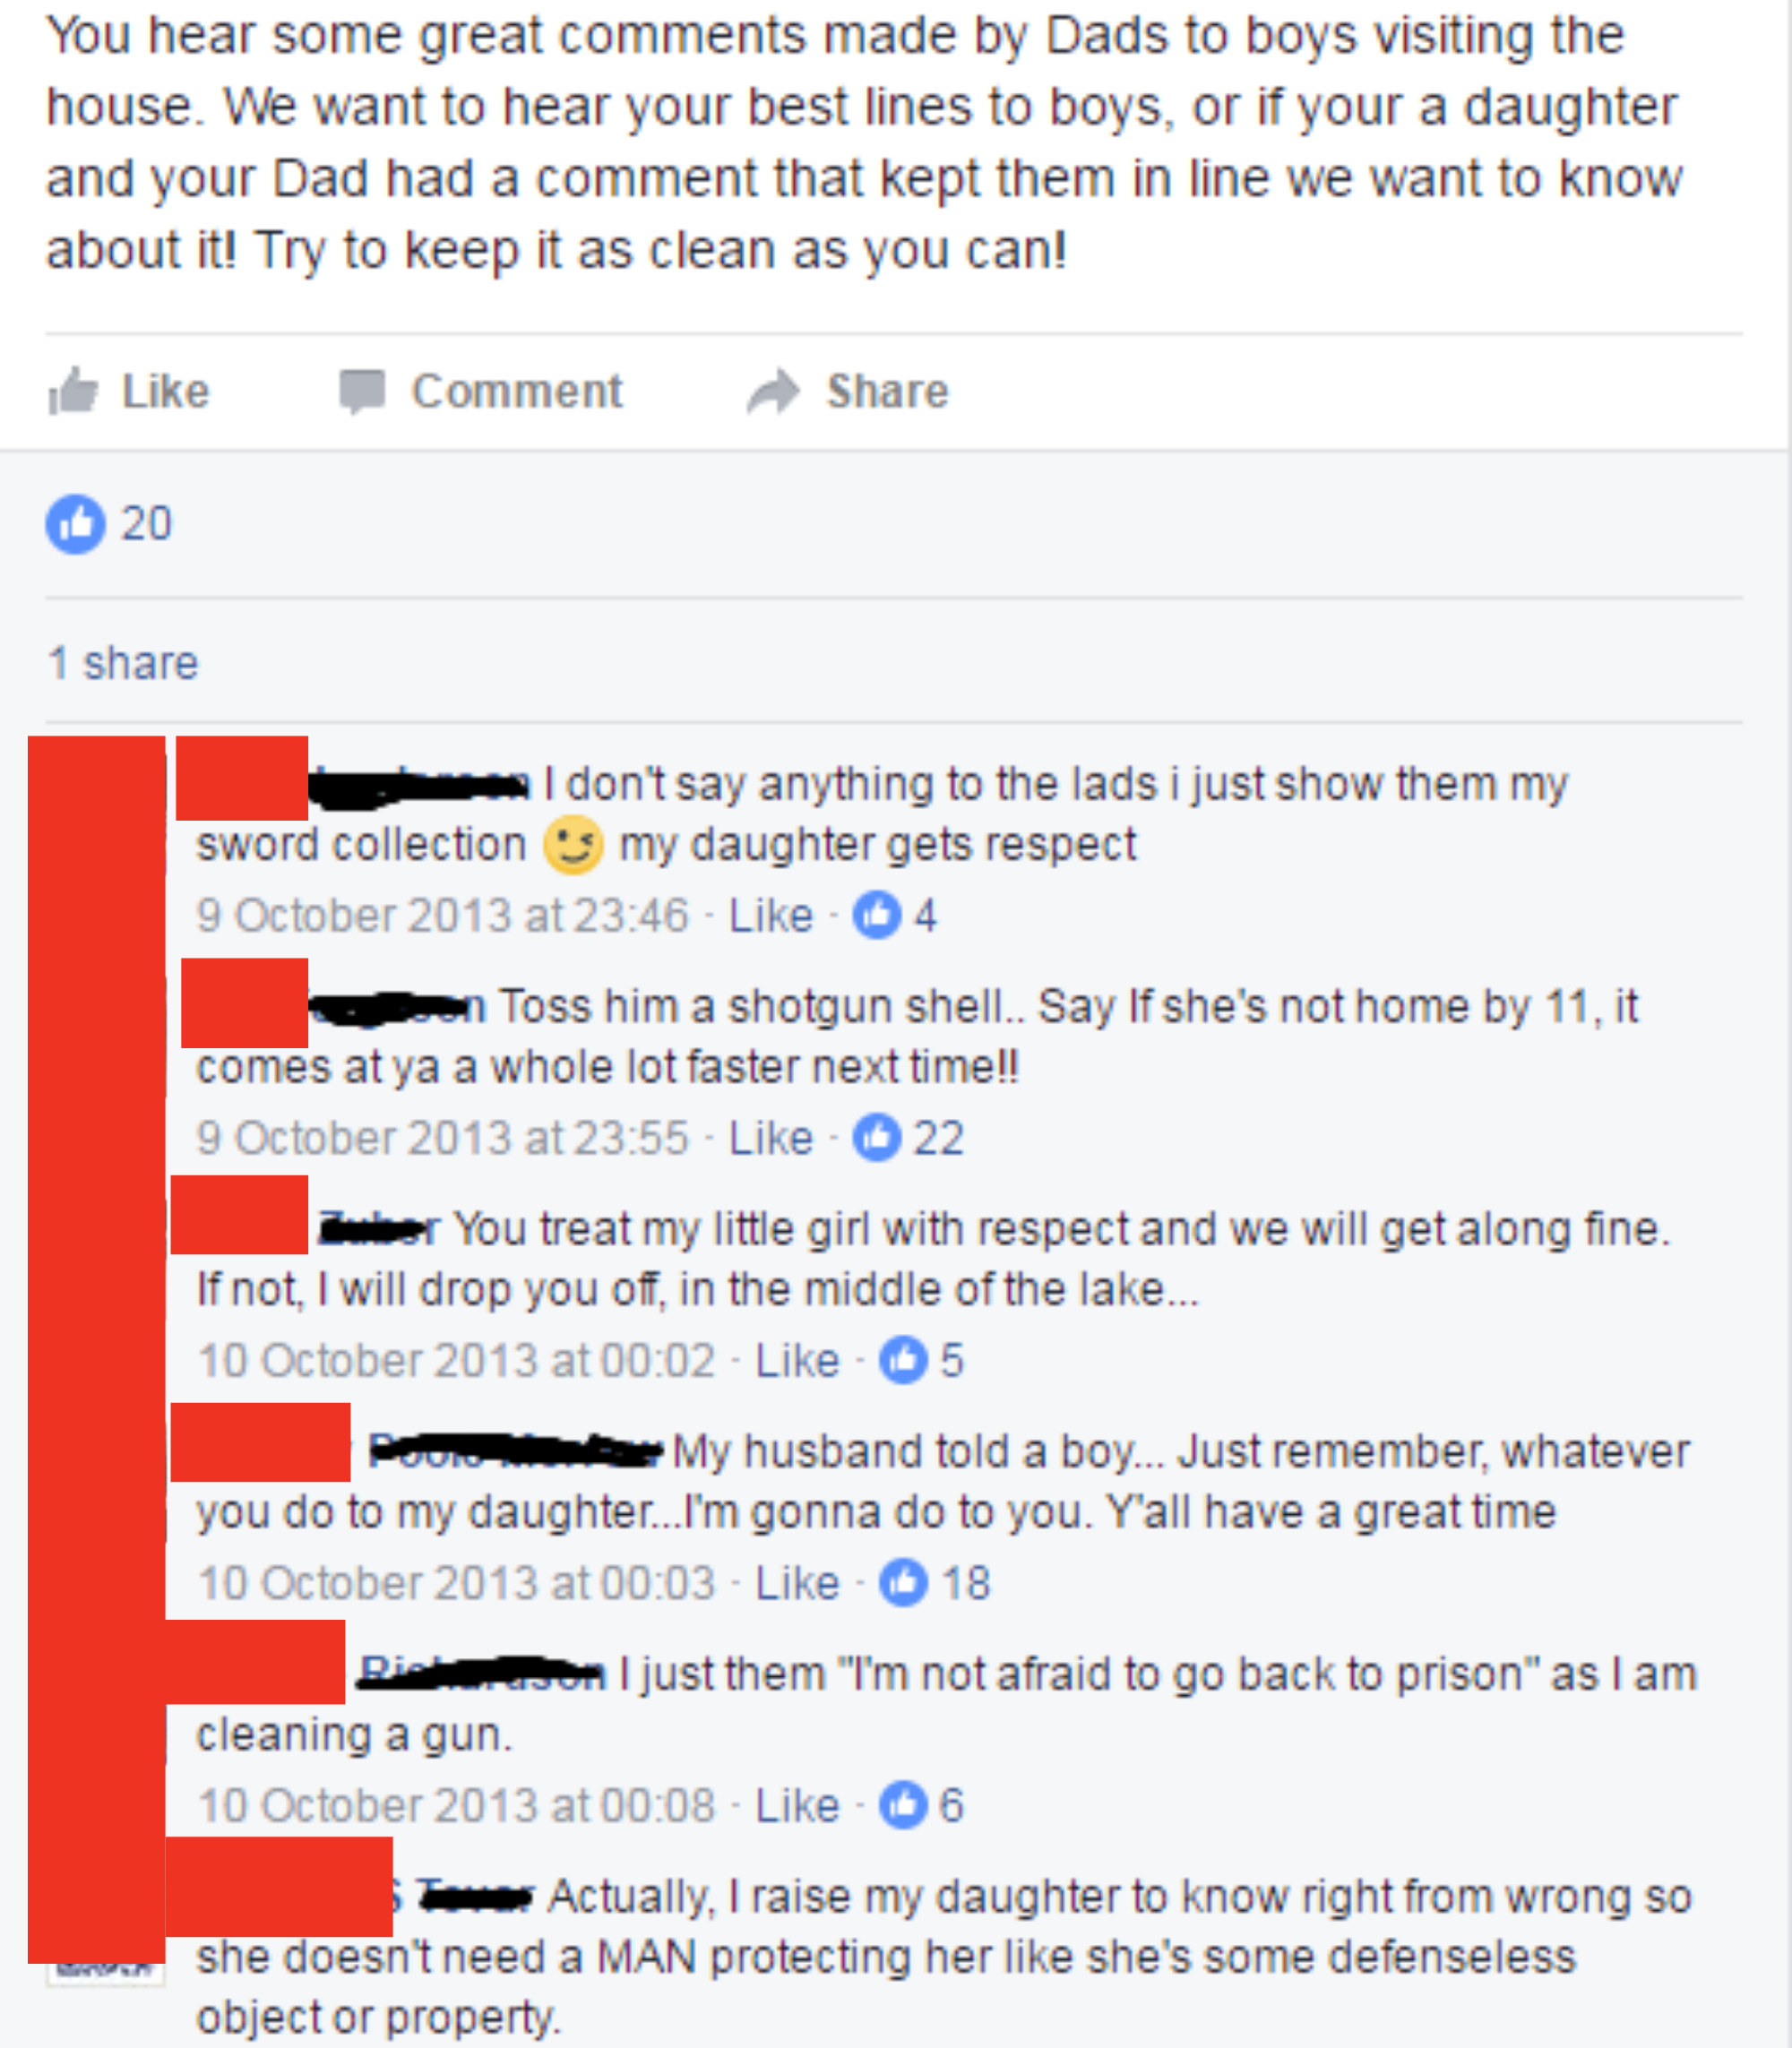 A series of Facebook comments of people sharing what they say to boys dating their daughters